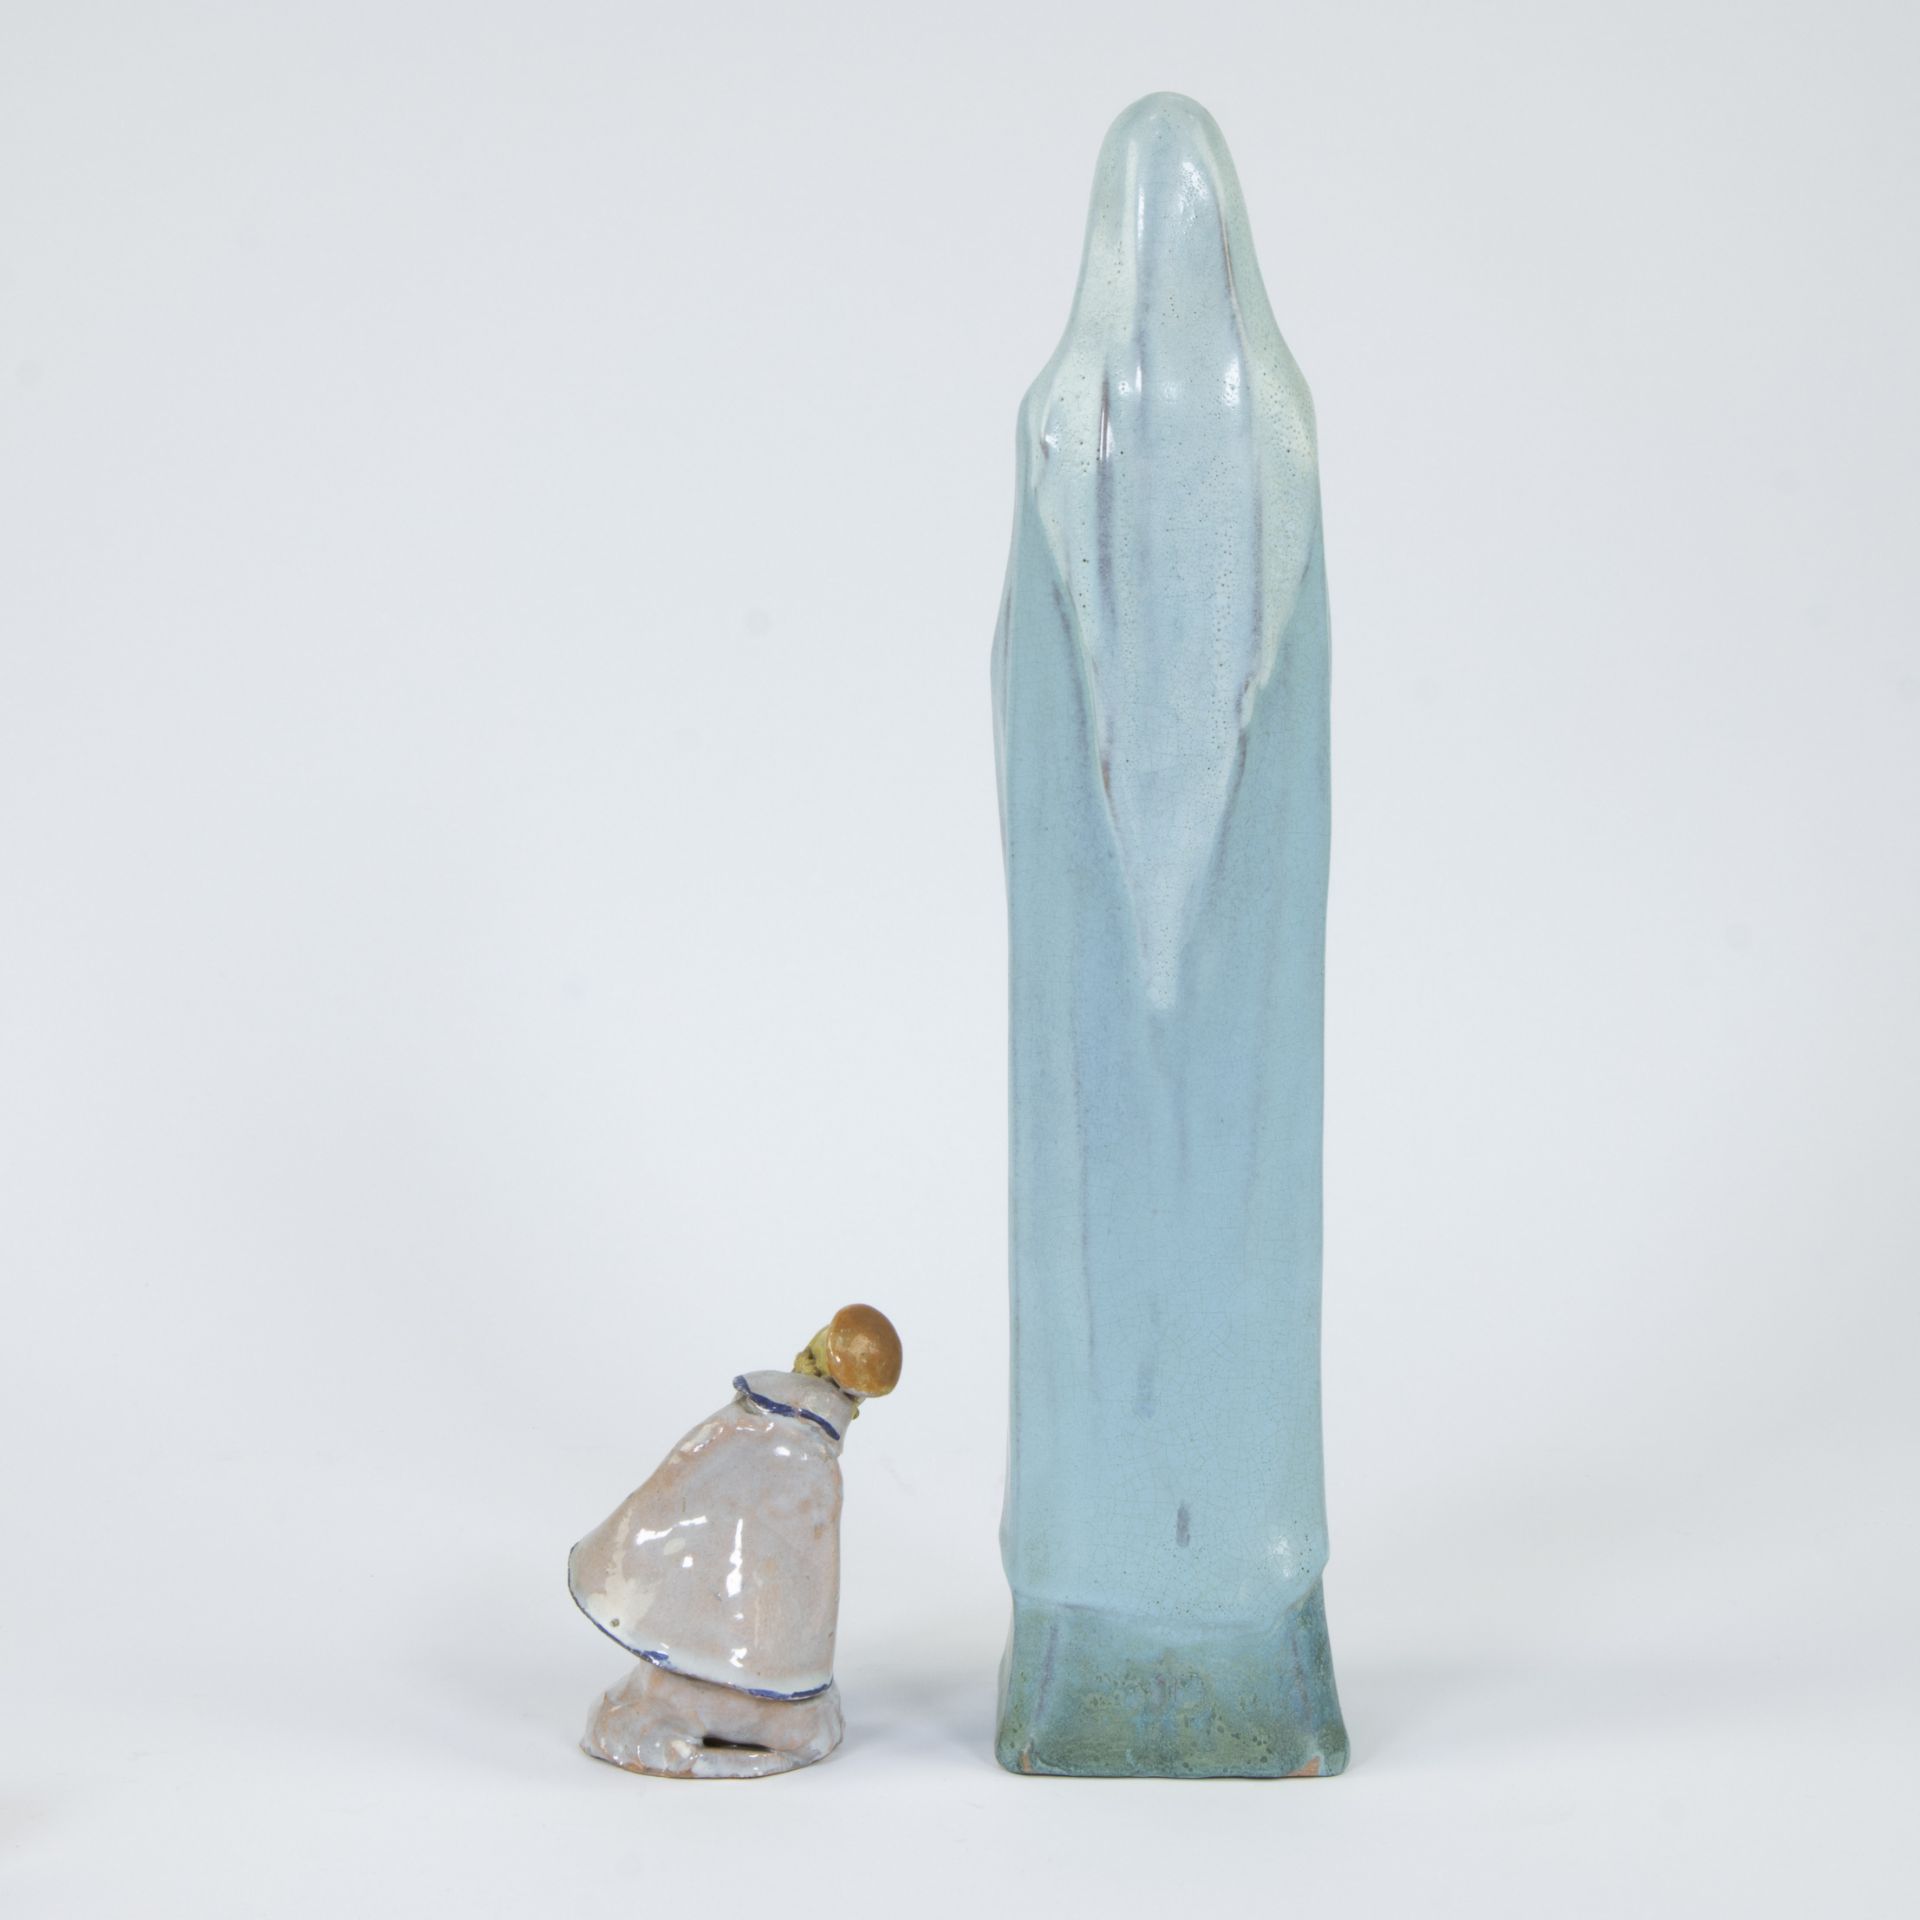 Domien INGELS (1881-1946), OLV and seated OLV in glazed ceramic and bronze medal - Image 3 of 5